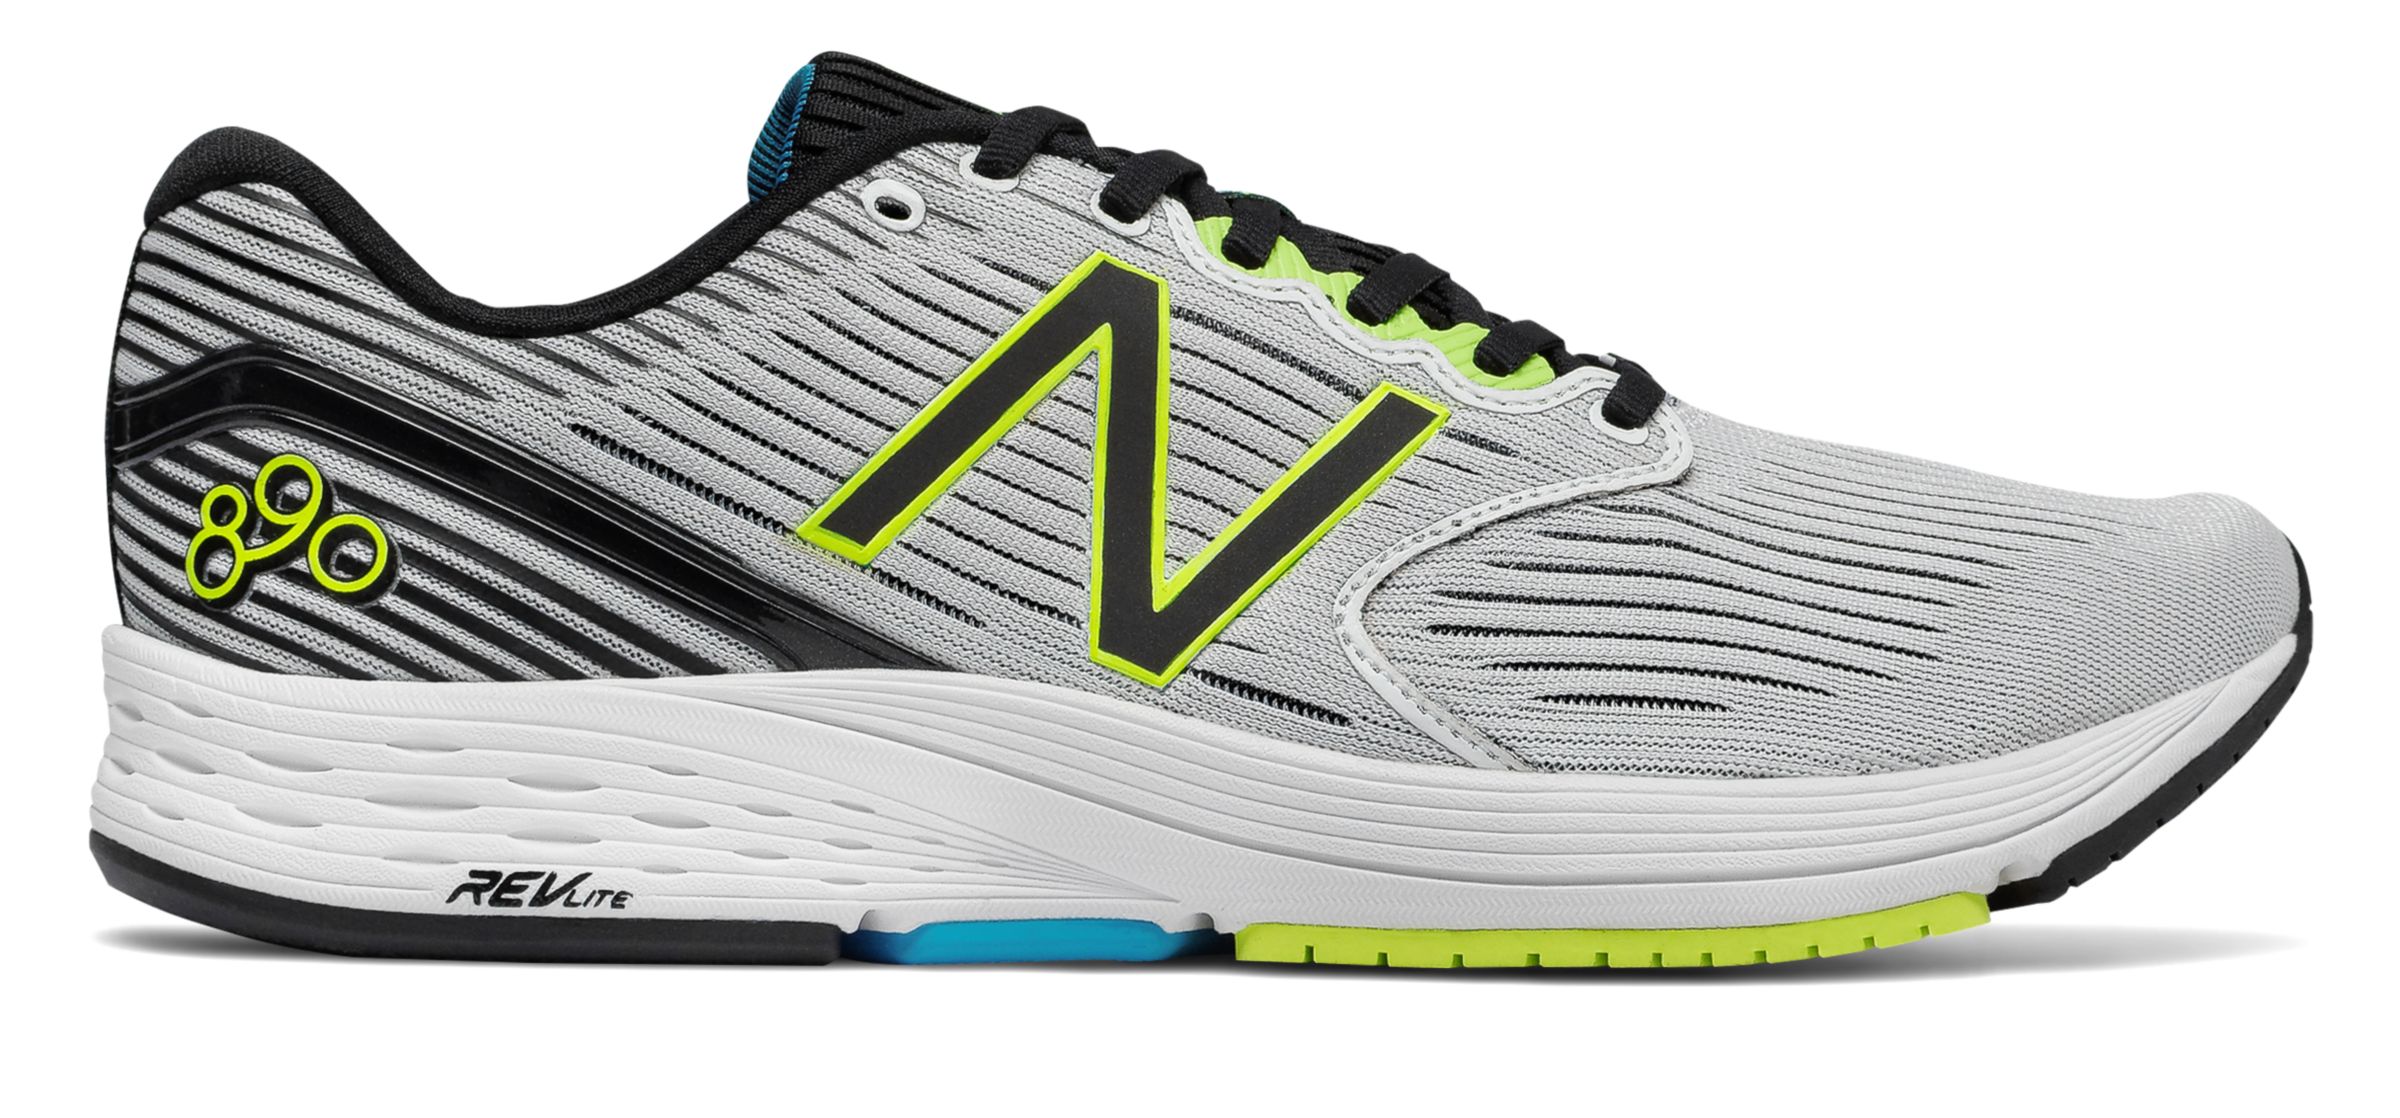 New Balance M890-V6 on Sale - Discounts Up to 50% Off on M890WB6 at Joe's New  Balance Outlet